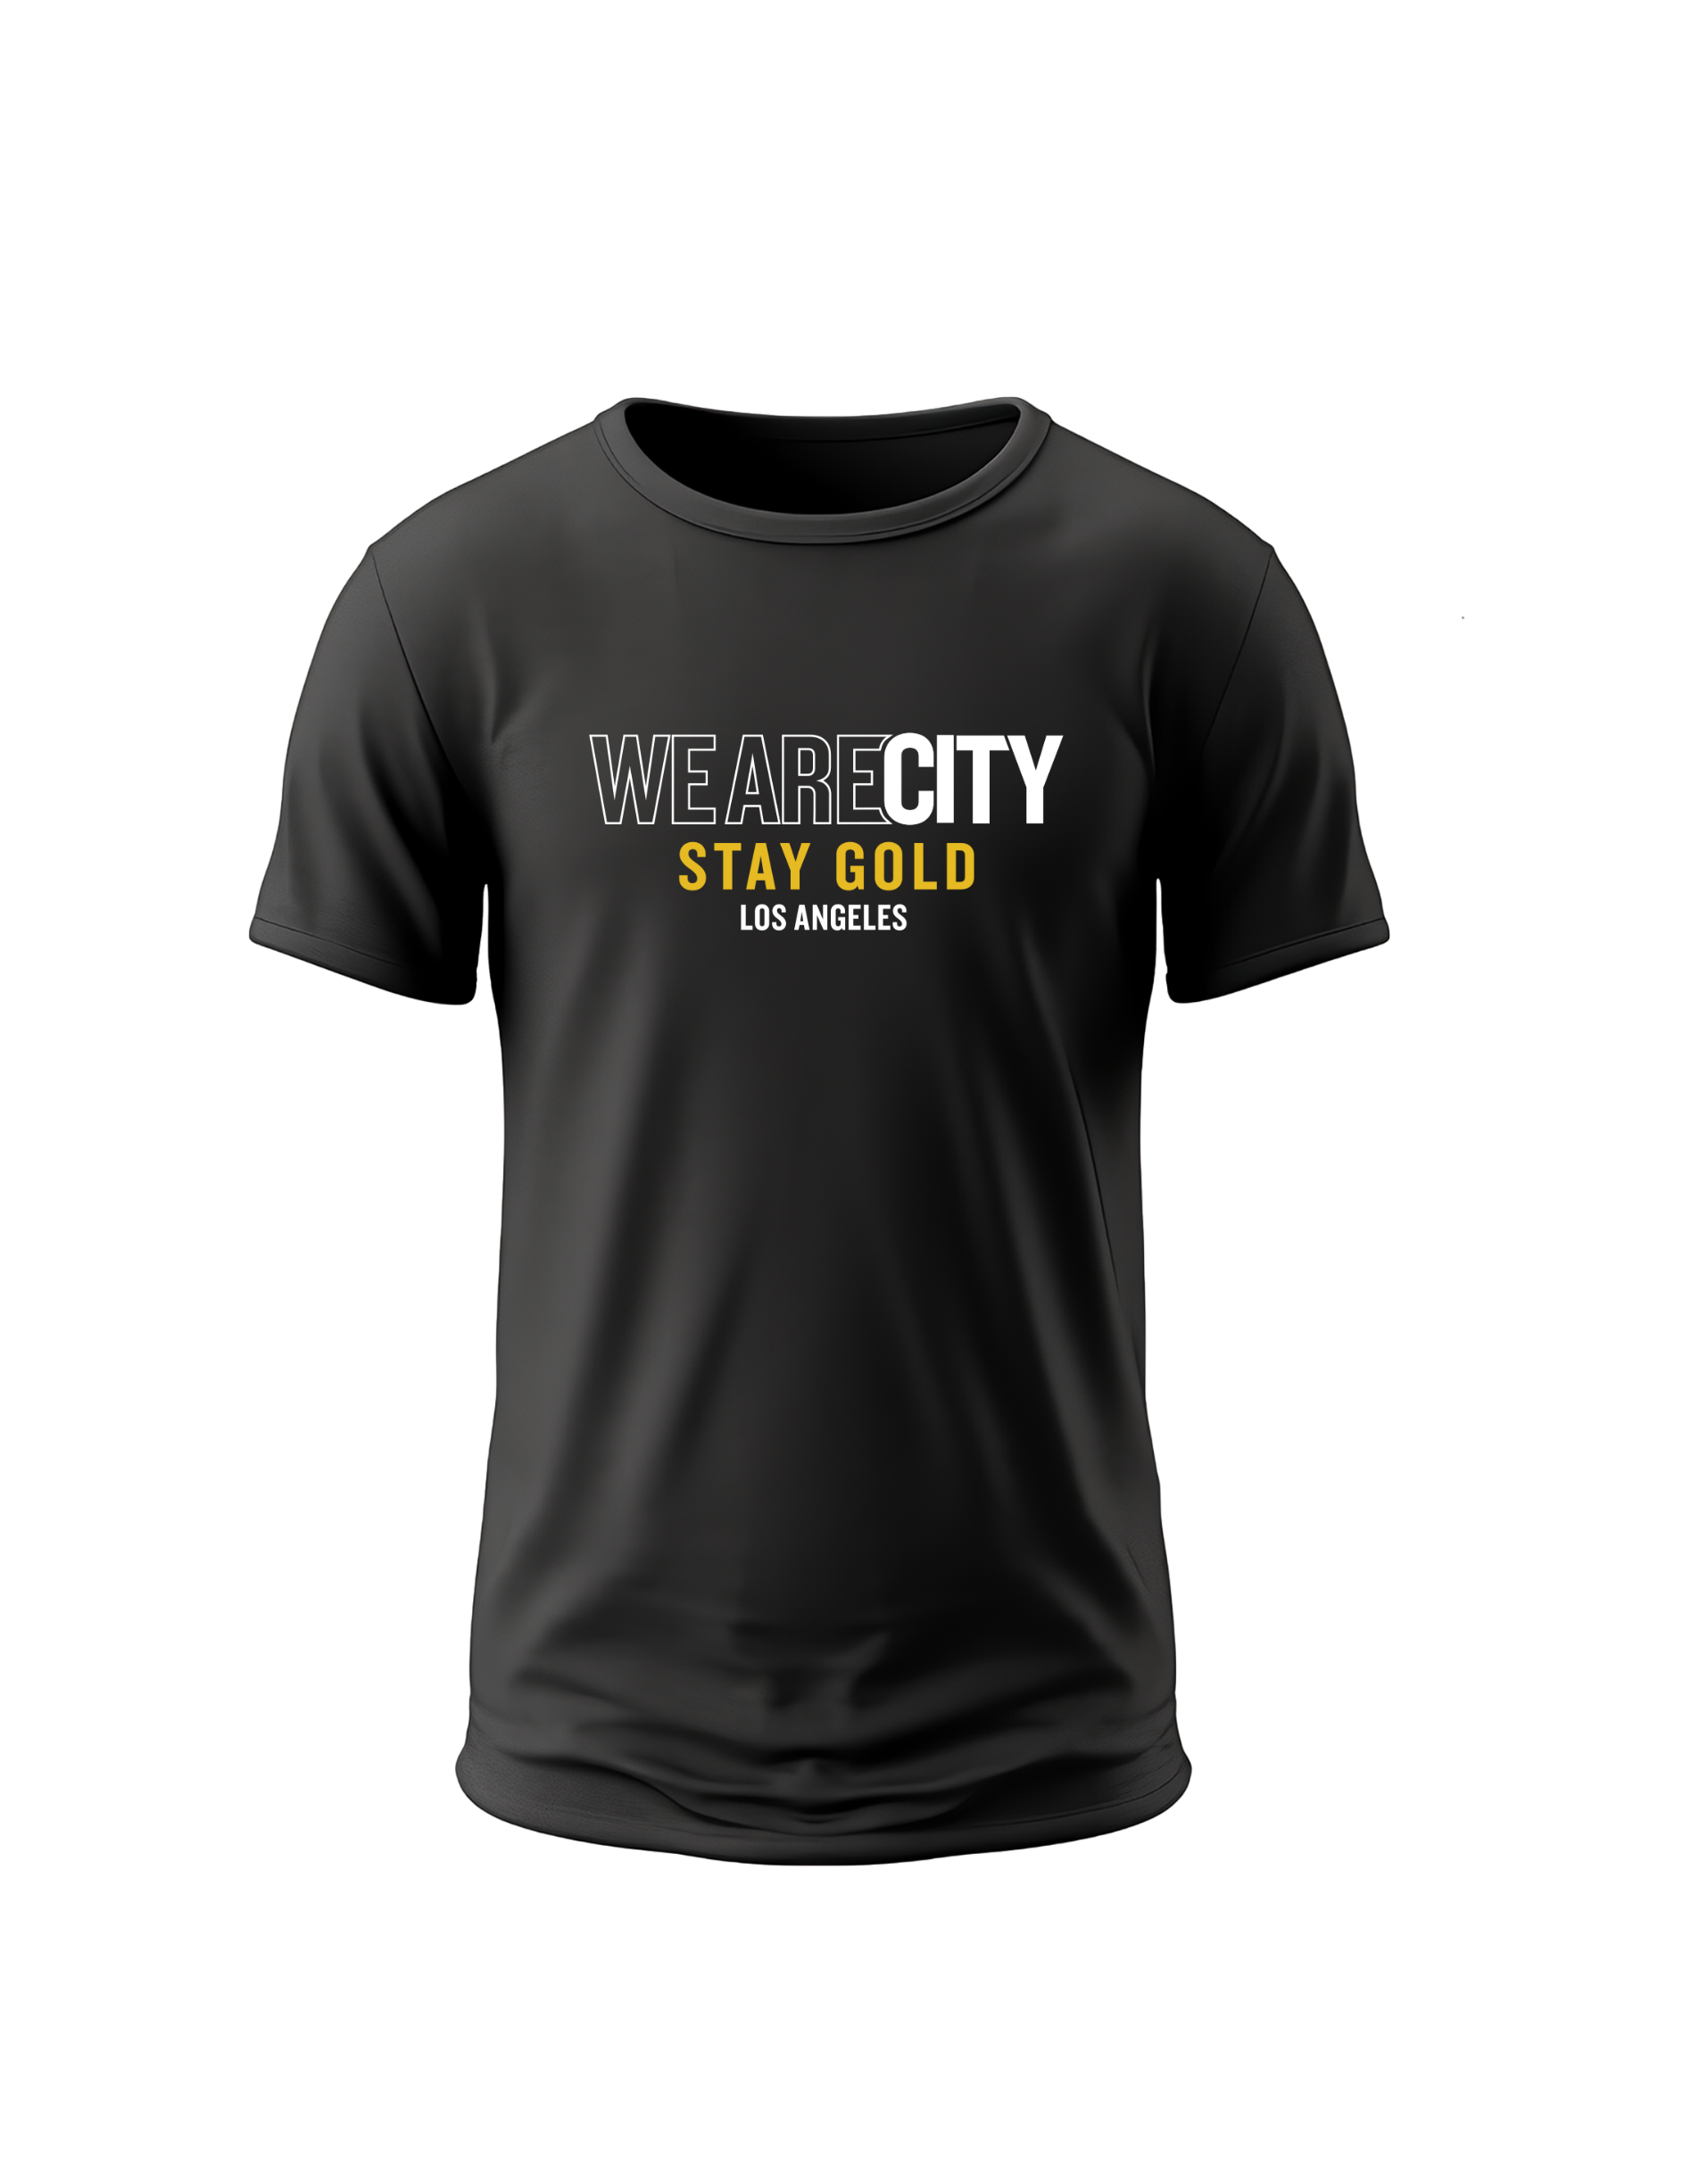 We Are CITY Stay Gold T Shirt